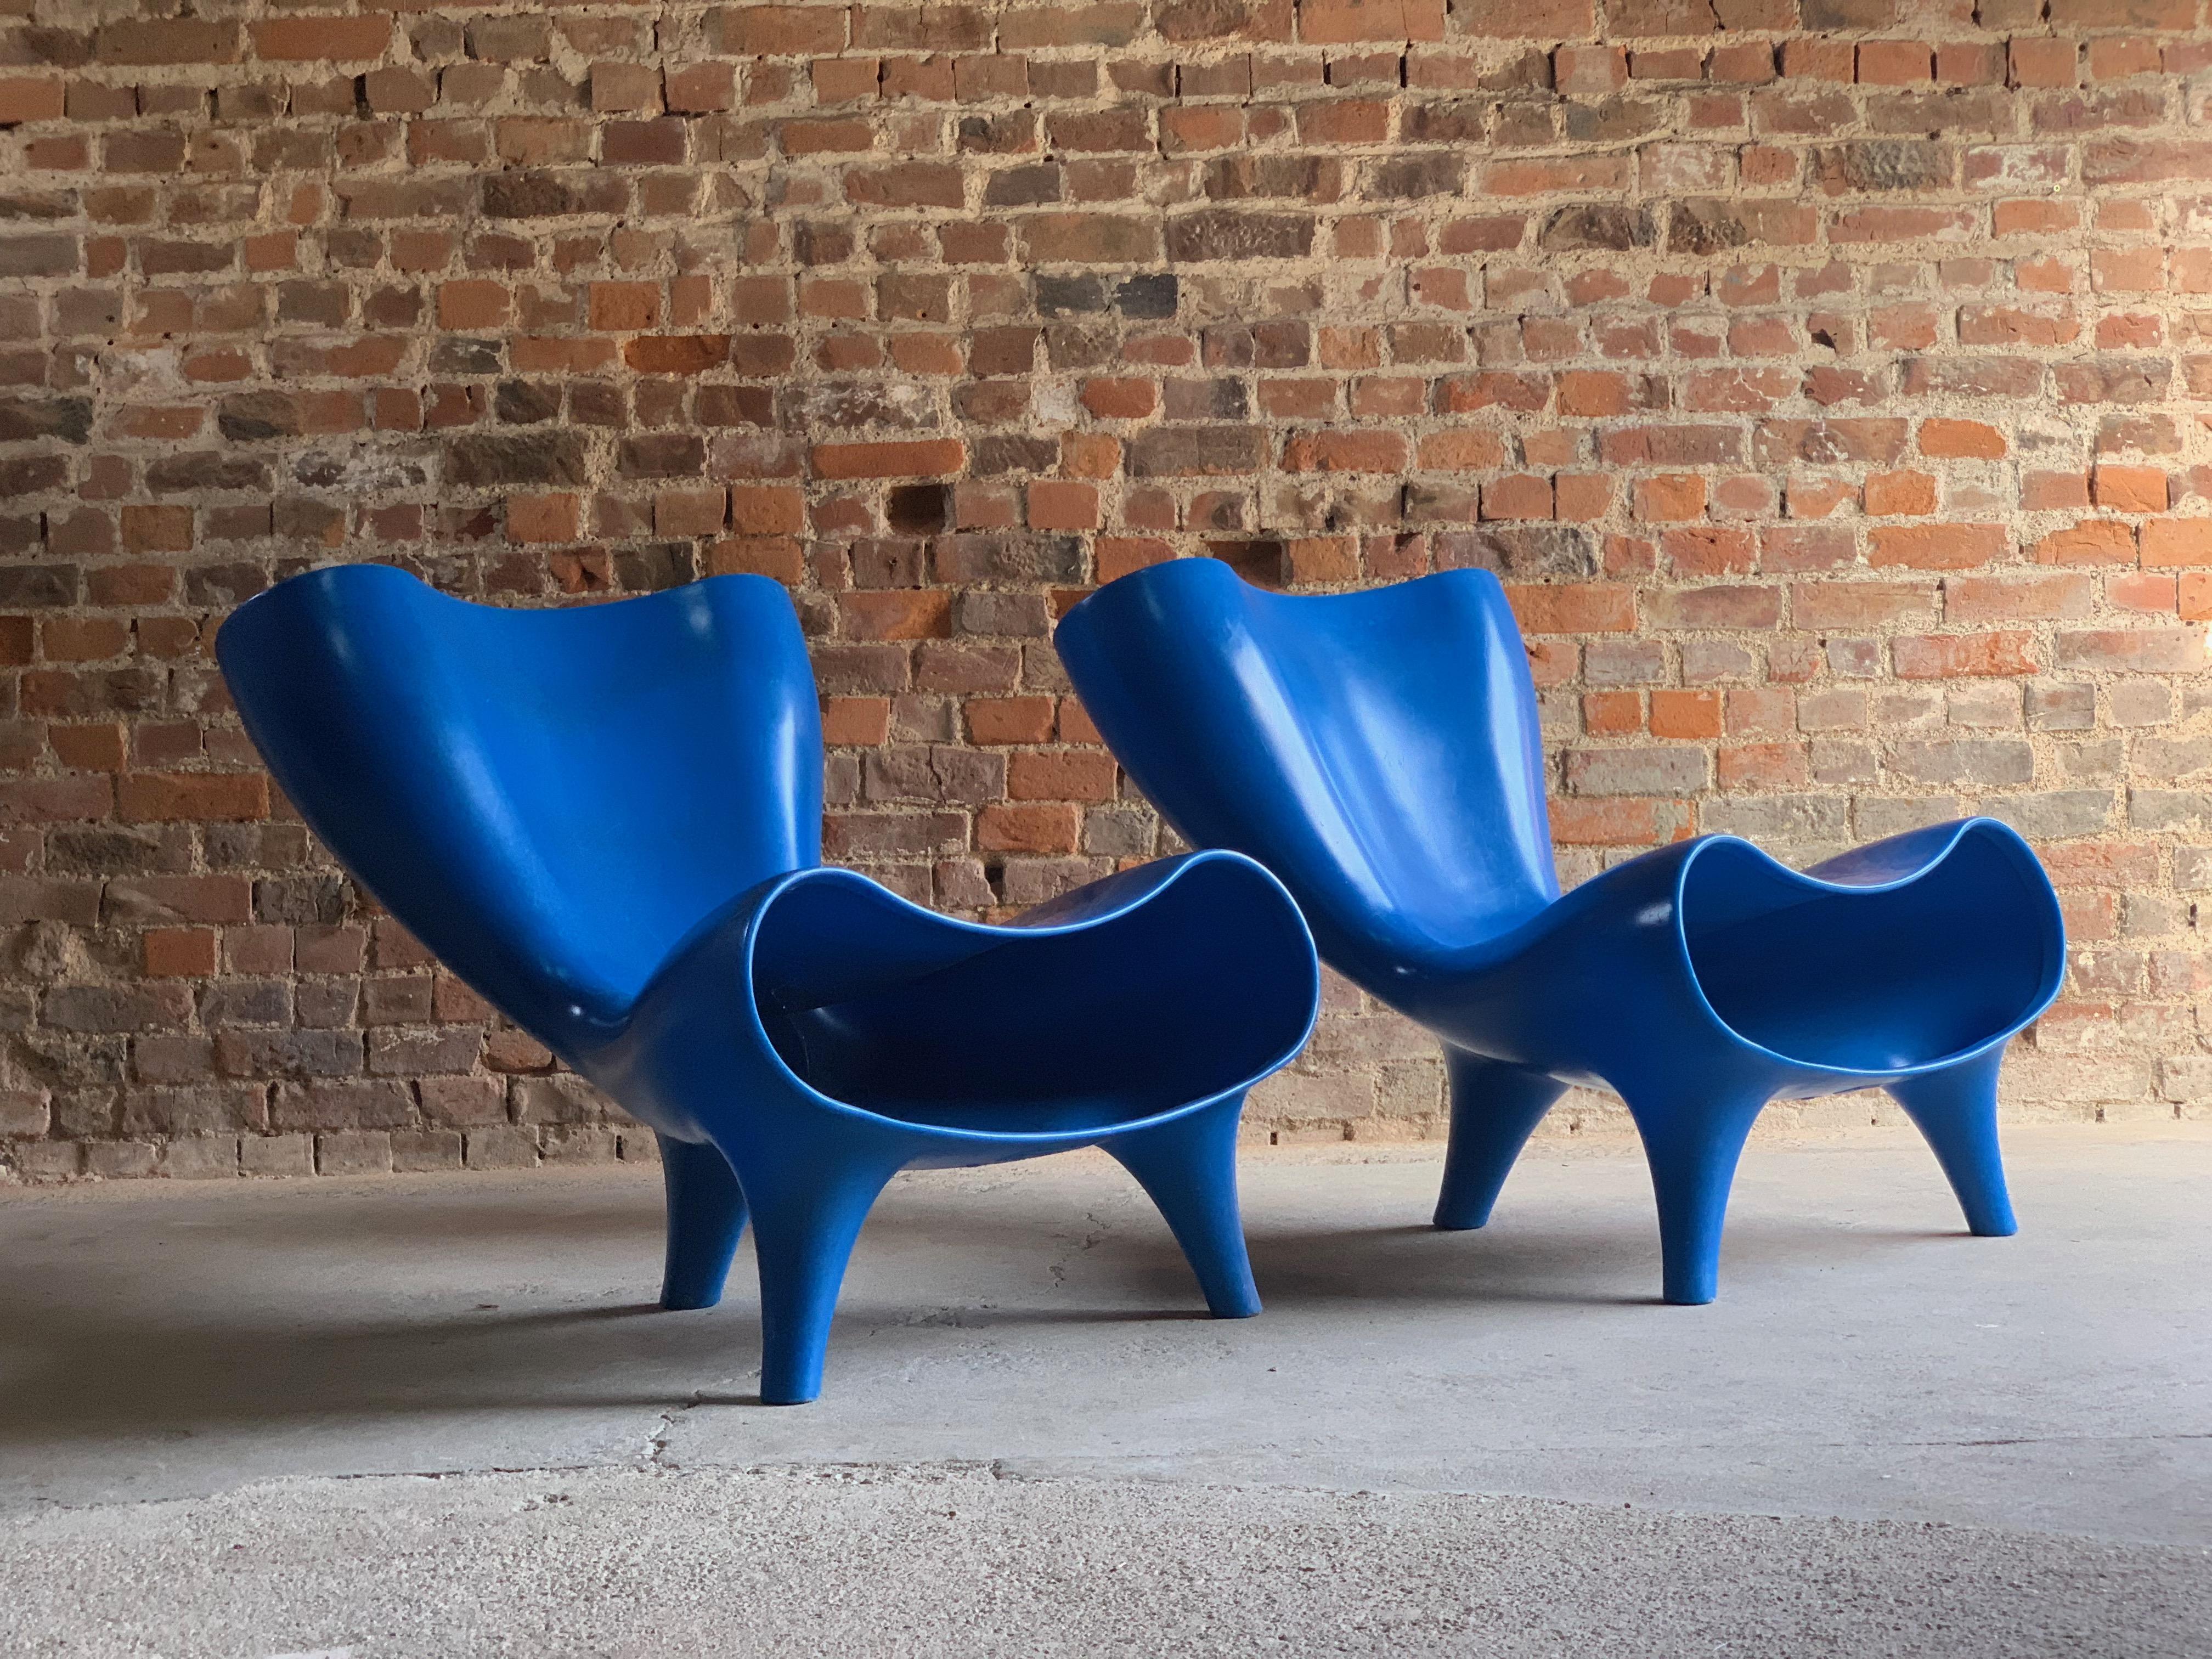 Marc Newson electric blue orgone chairs pair circa 1993

Rare Orgone chairs by Marc Newson circa 1993 finished in electric blue, the Orgone chair was designed in 1993 by Marc Newson. The original design comes from a series of limited edition